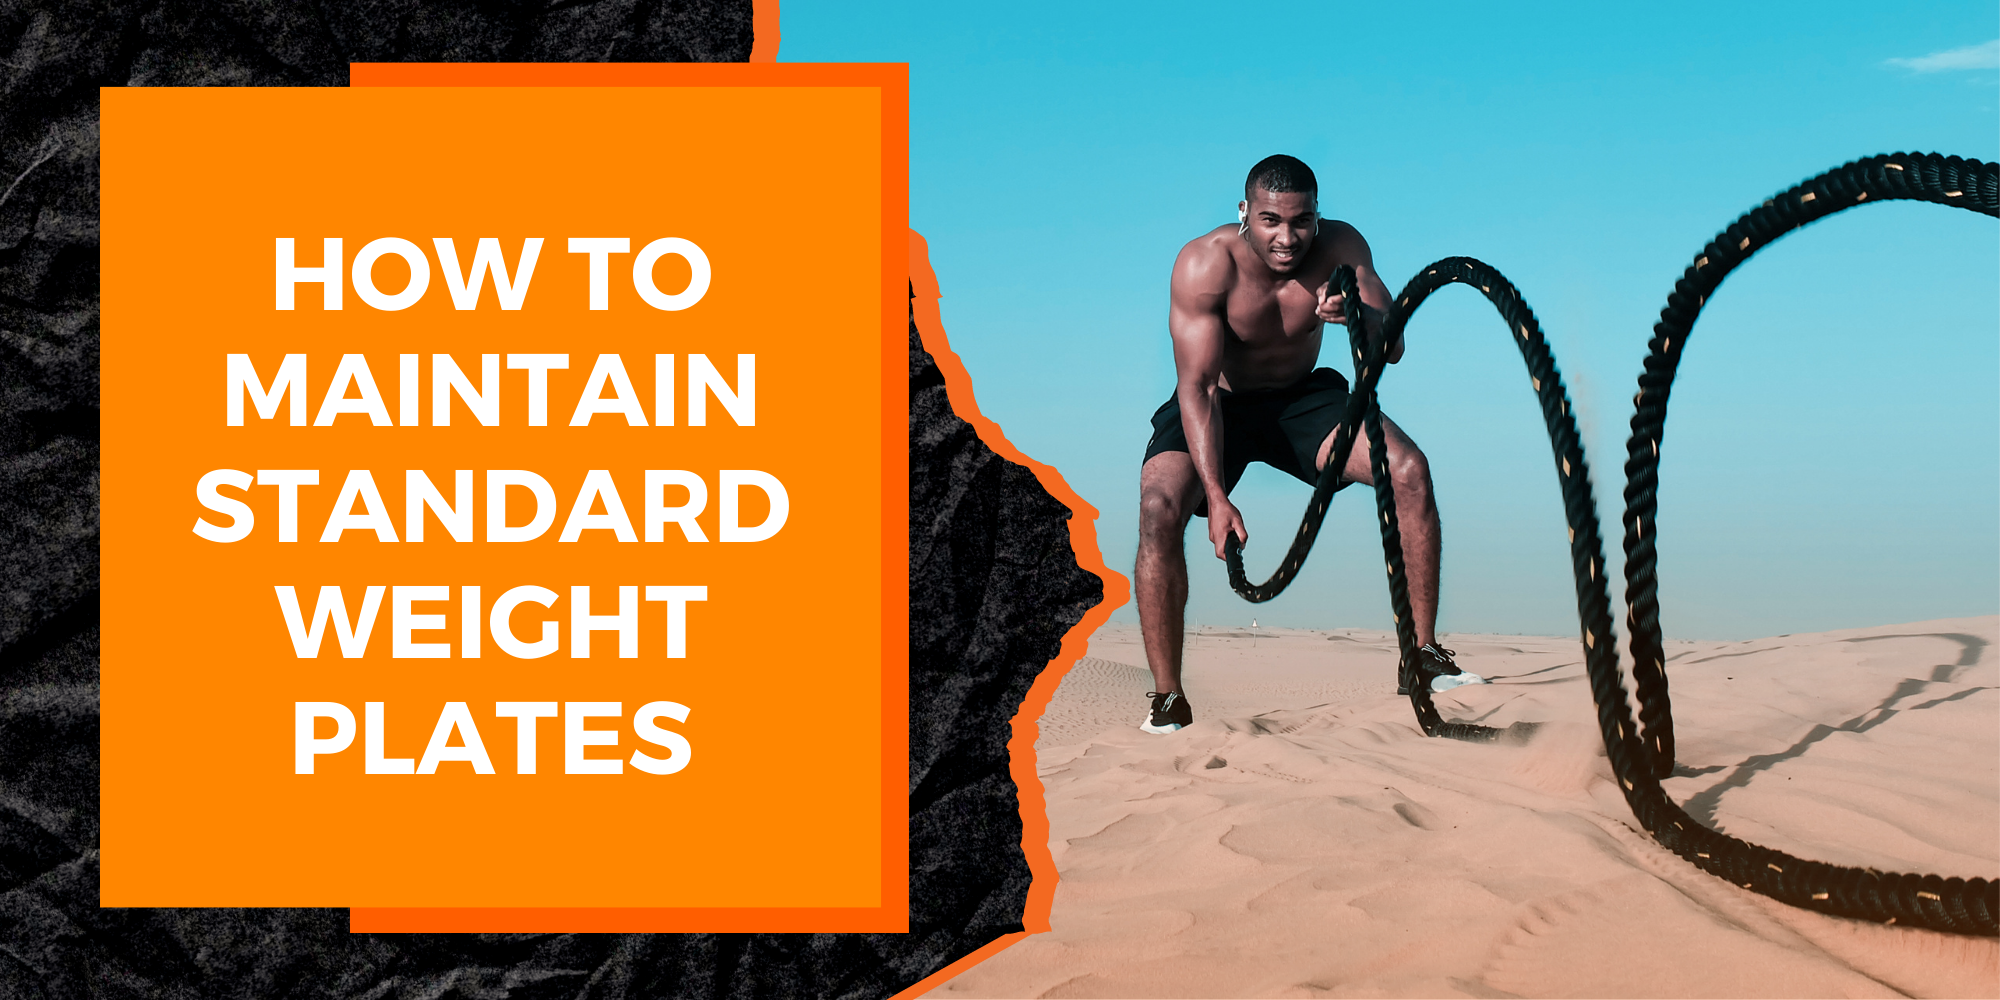 How to Maintain Standard Weight Plates